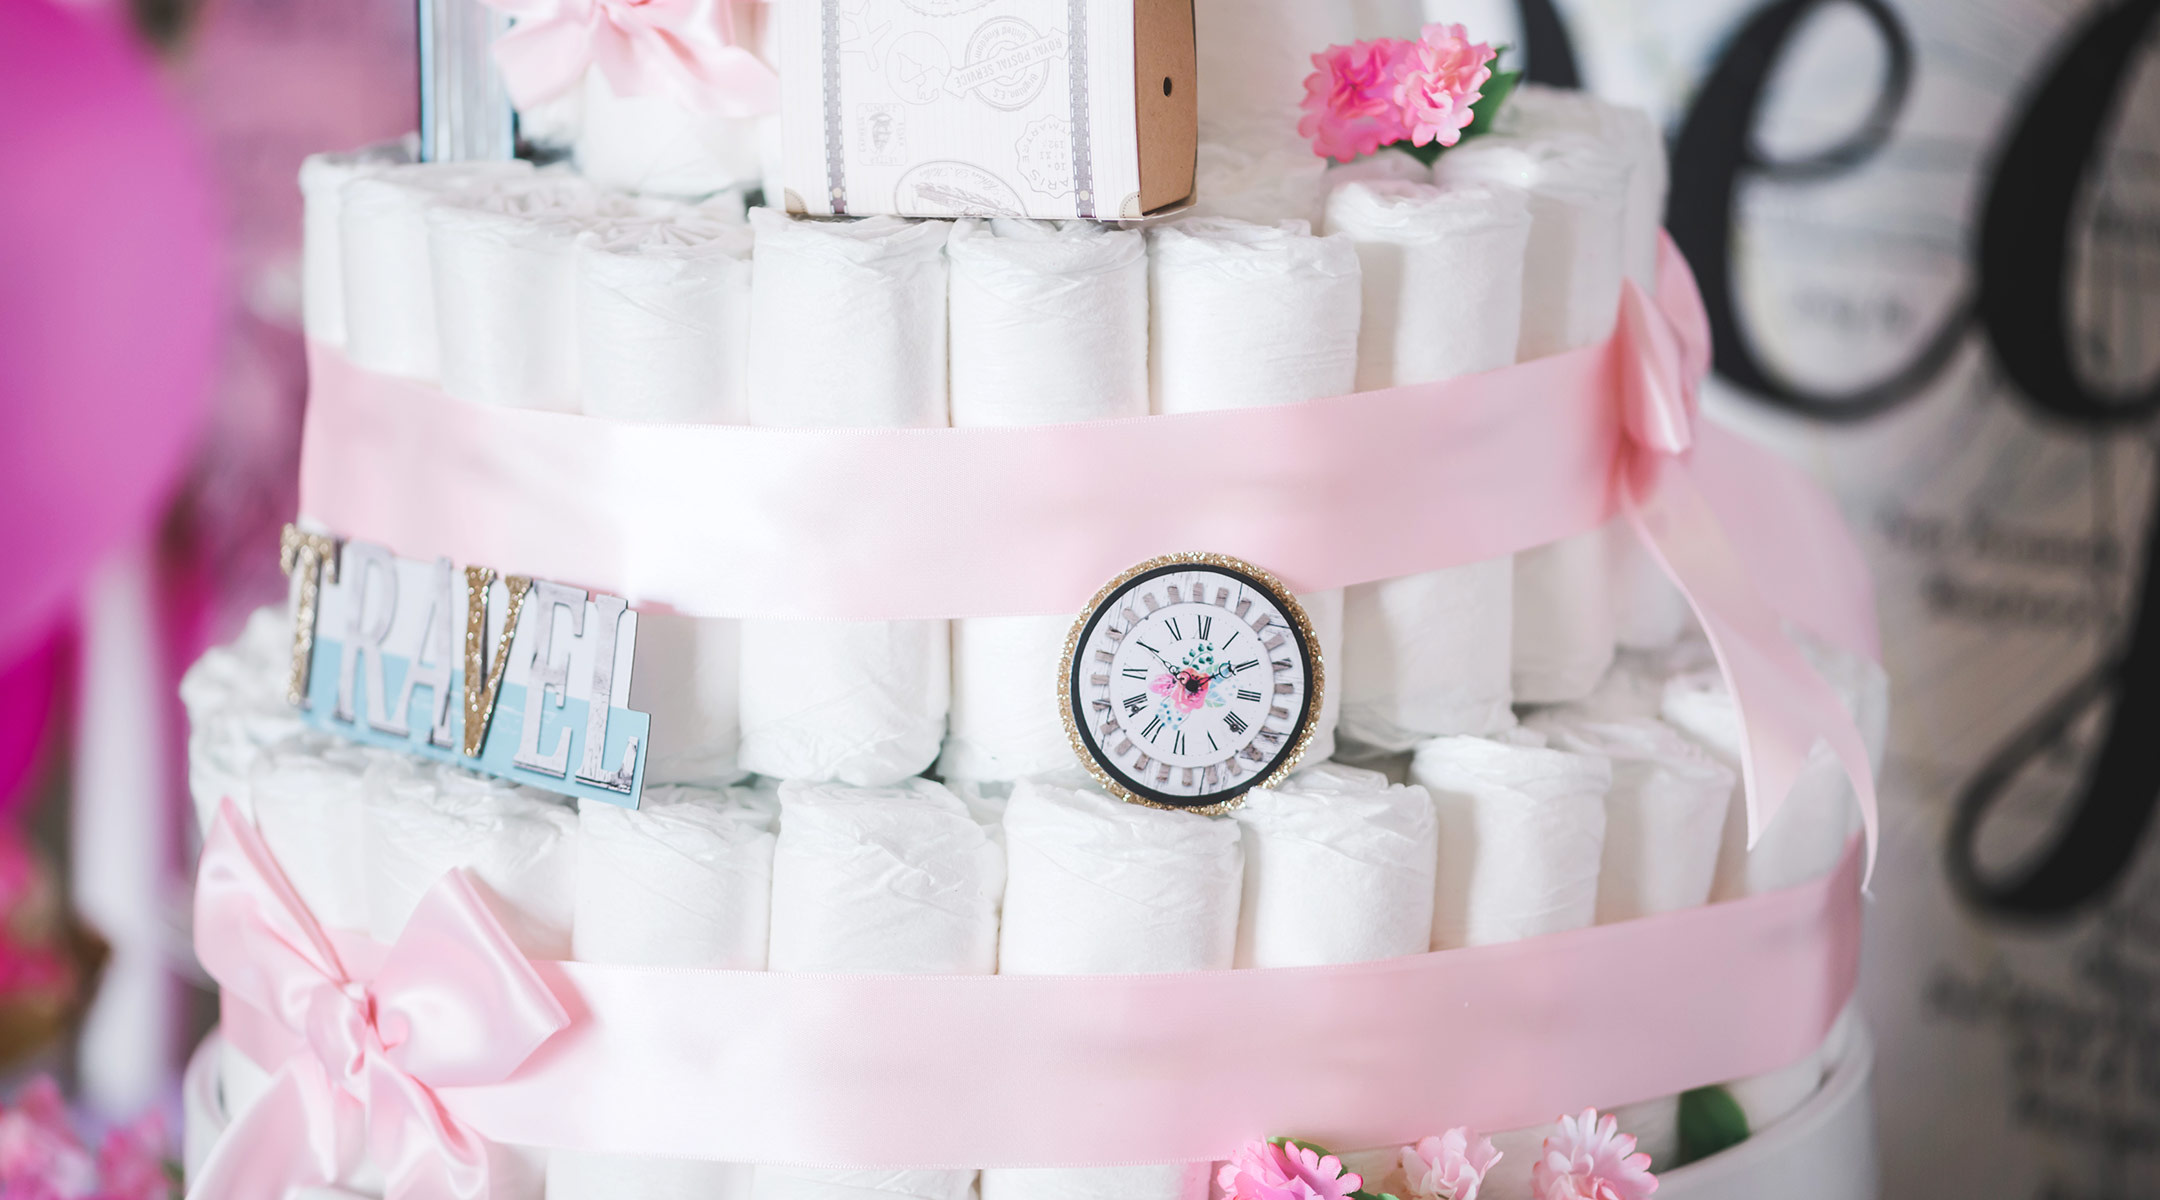 How to Make a Diaper Cake—Plus 9 You Can Buy Online